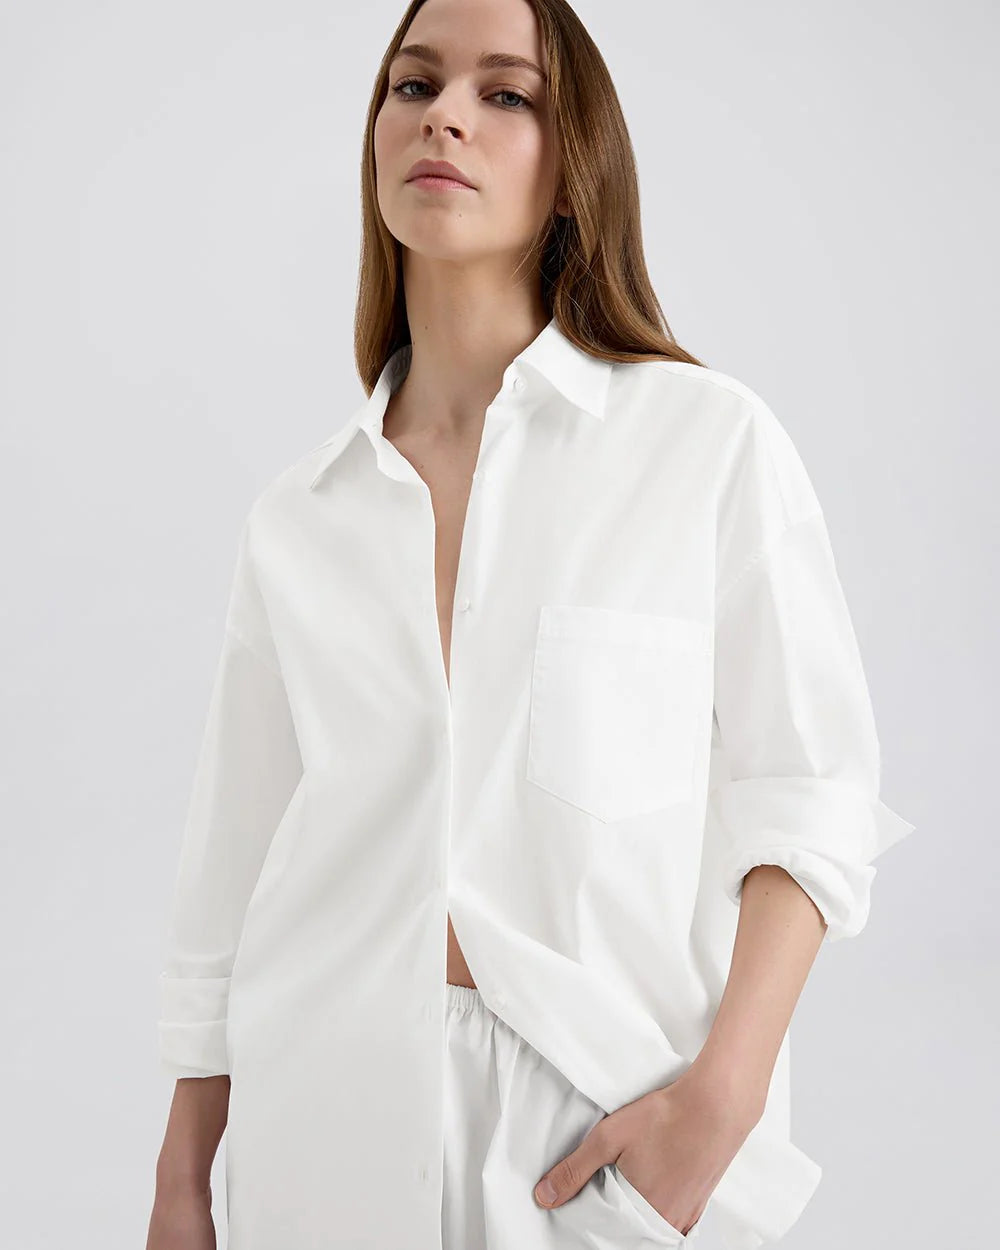 Solid & Striped The Jancy Blouse